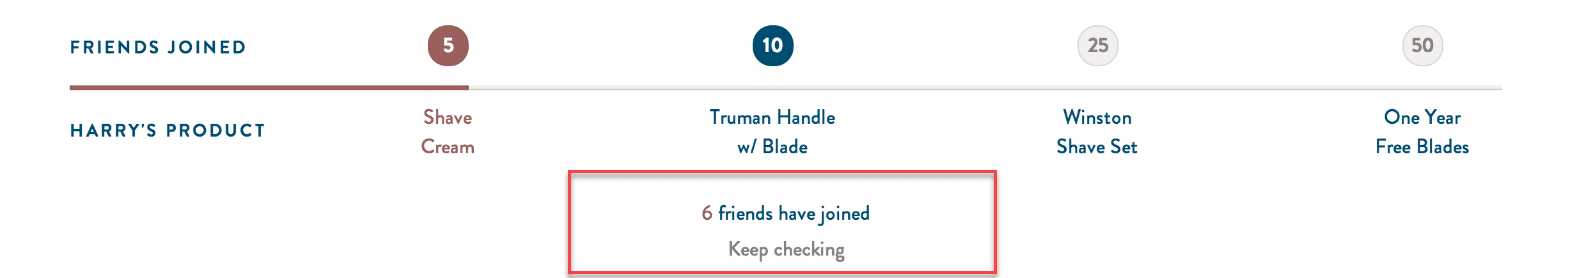 progress bar with encouragement to refer more friends